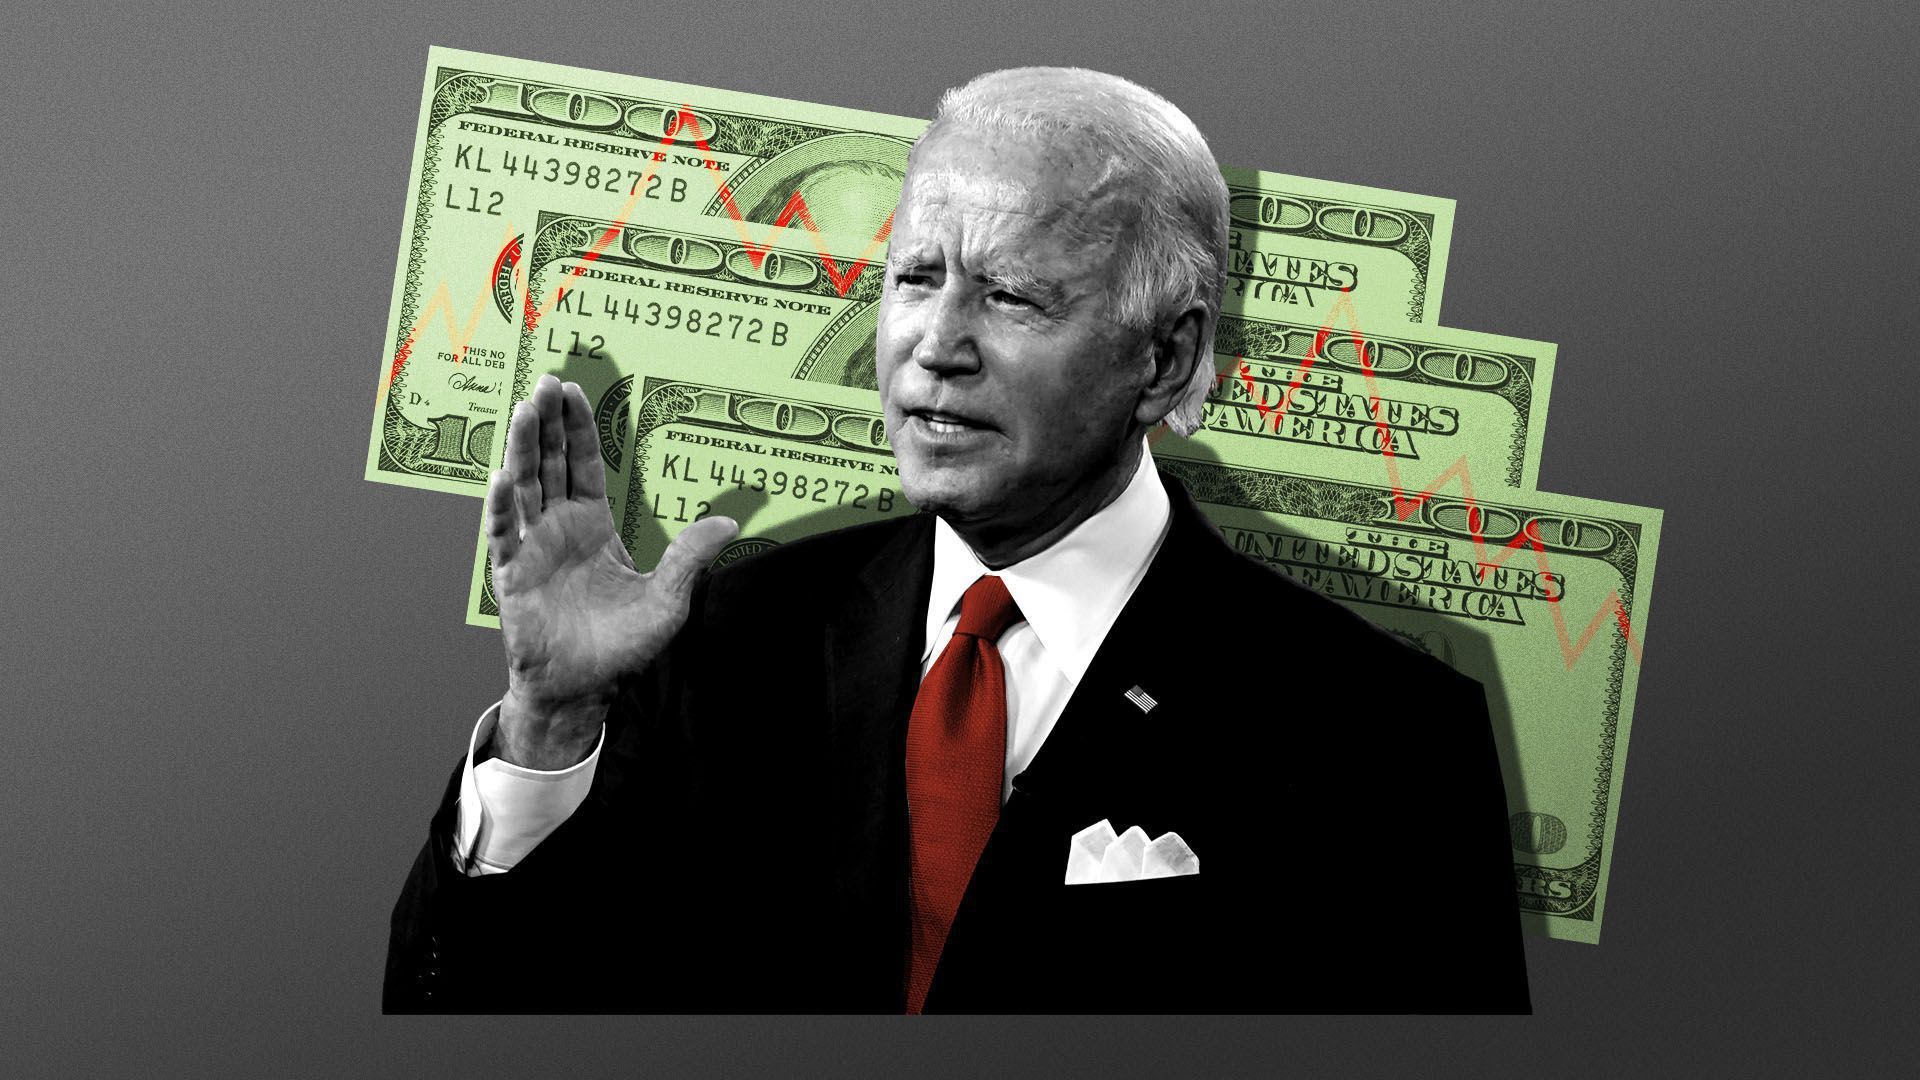 Biden with cash in the background. Photo illustration: Sarah Grillo/Axios. Photo: Drew Angerer/Getty Images